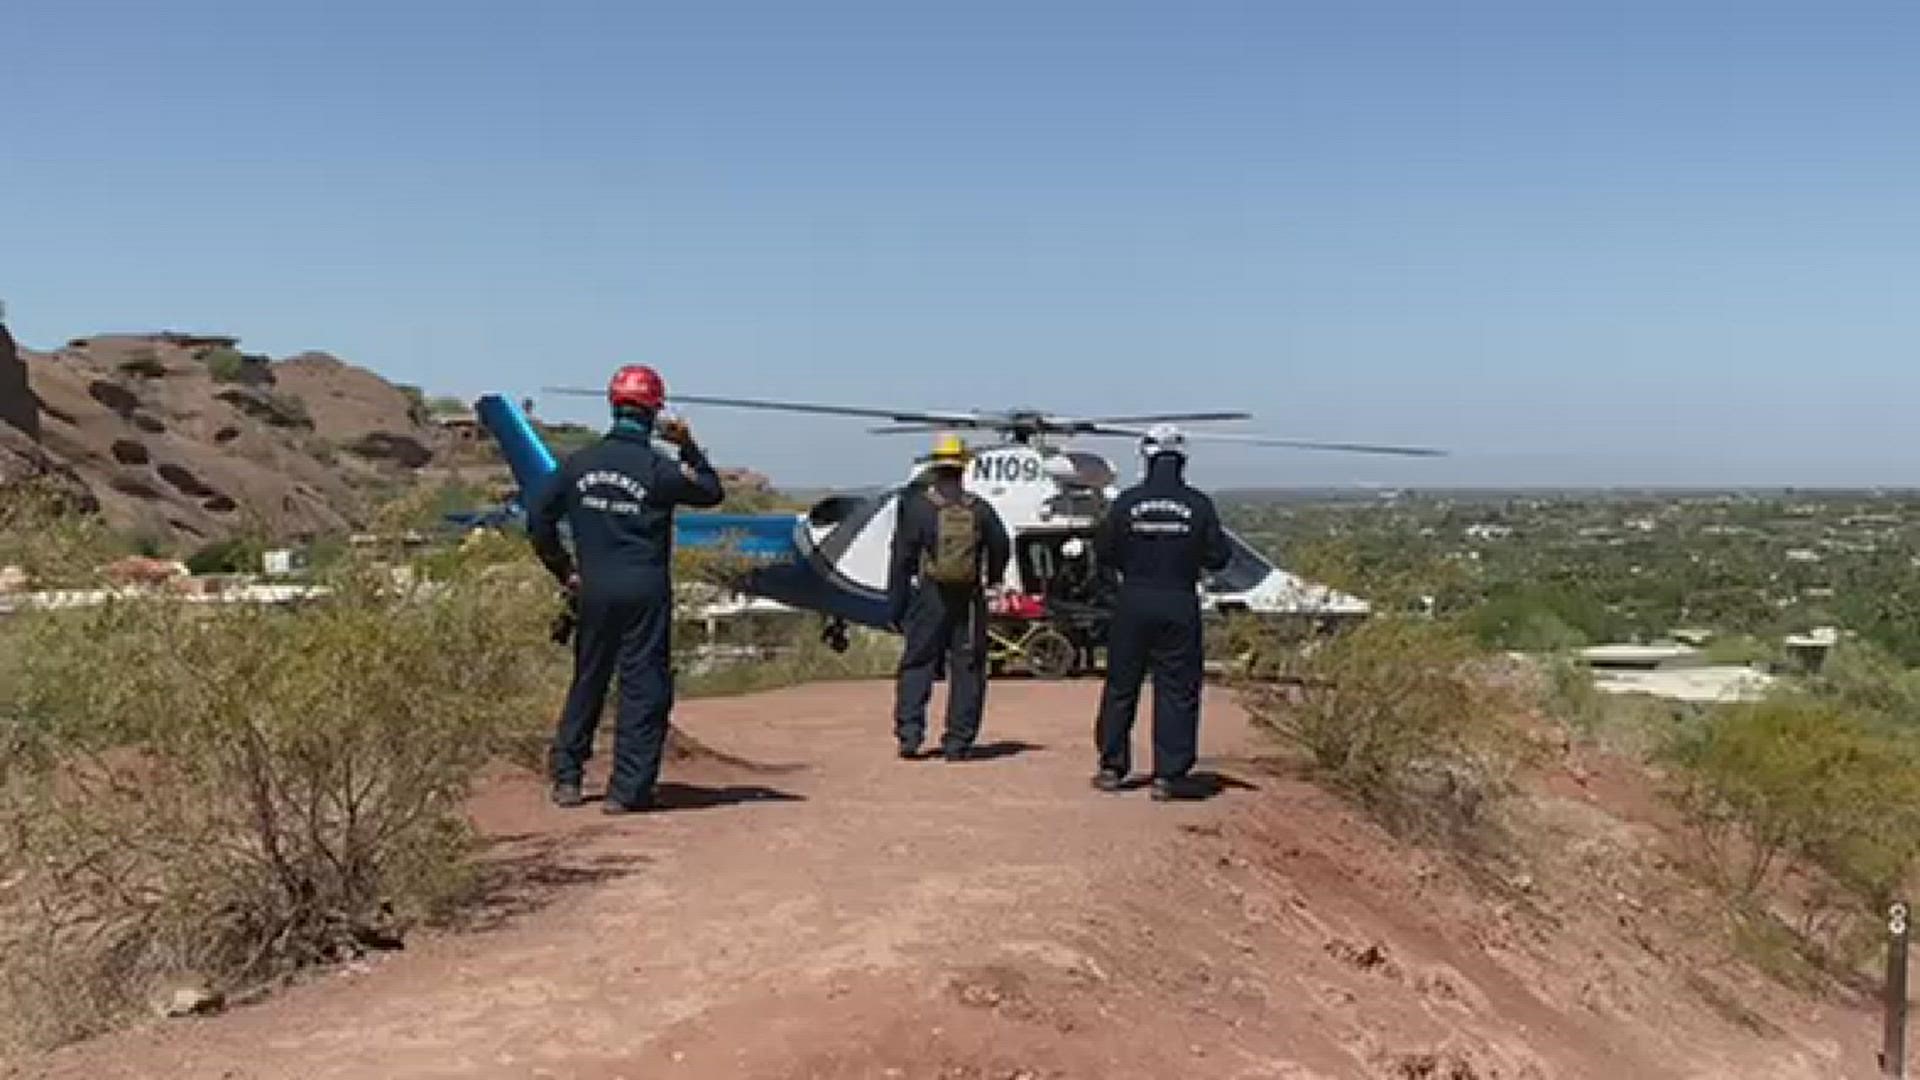 Phoenix Fire Department shows the moment their patient was unloaded from a helicopter after a rescue on Camelback Mountain.